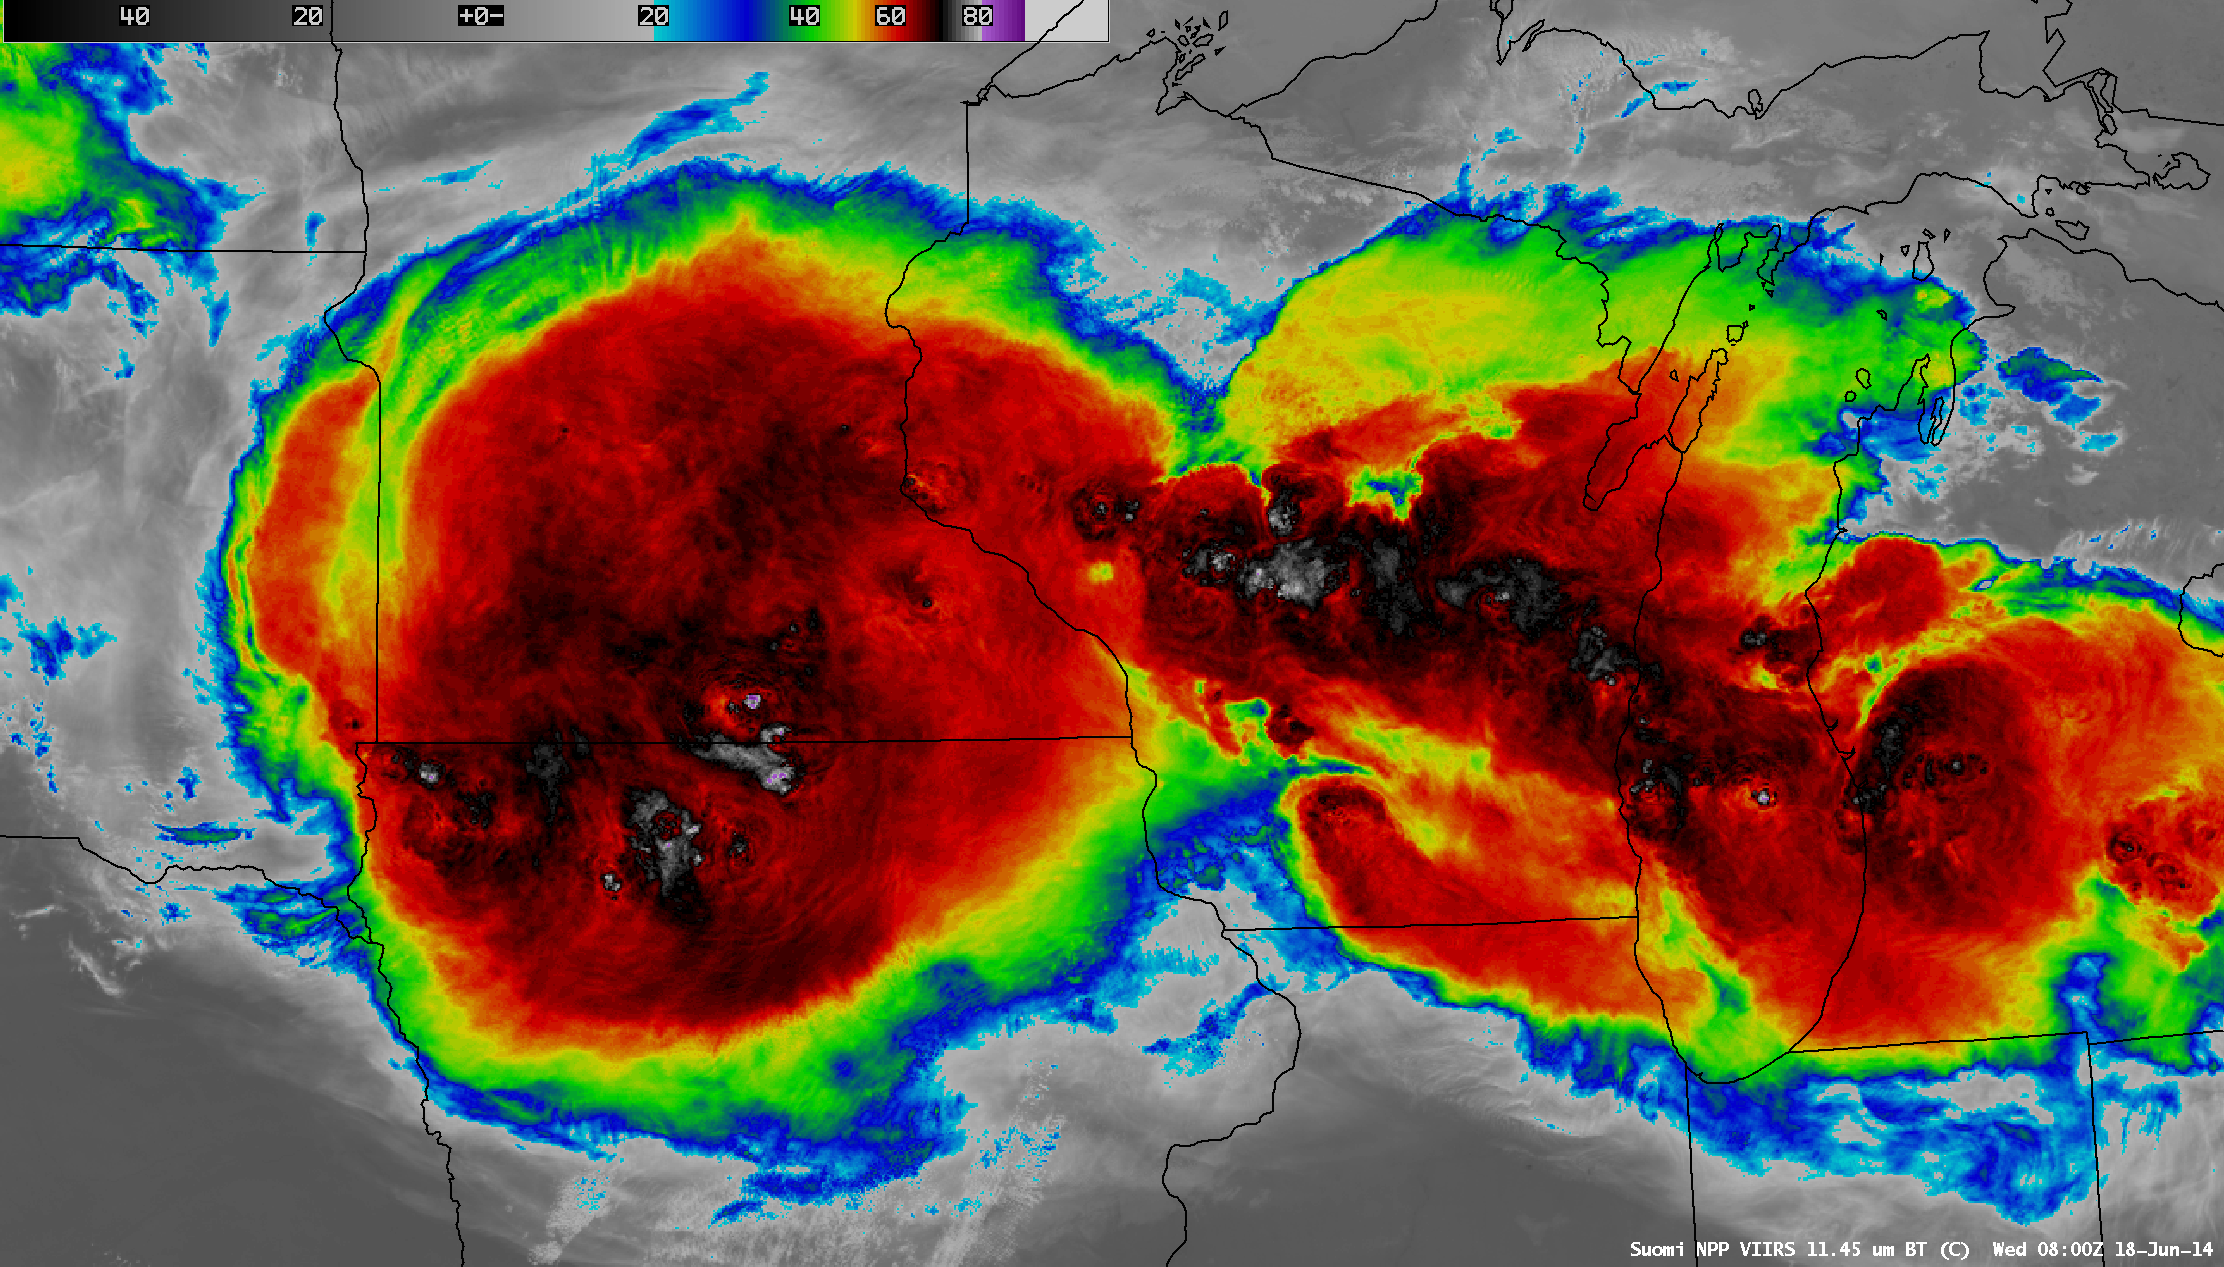 Suomi NPP VIIRS 11.45 µm IR channel and 0.7 µm Day/Night Band images, with cloud-to-ground lightning strikes